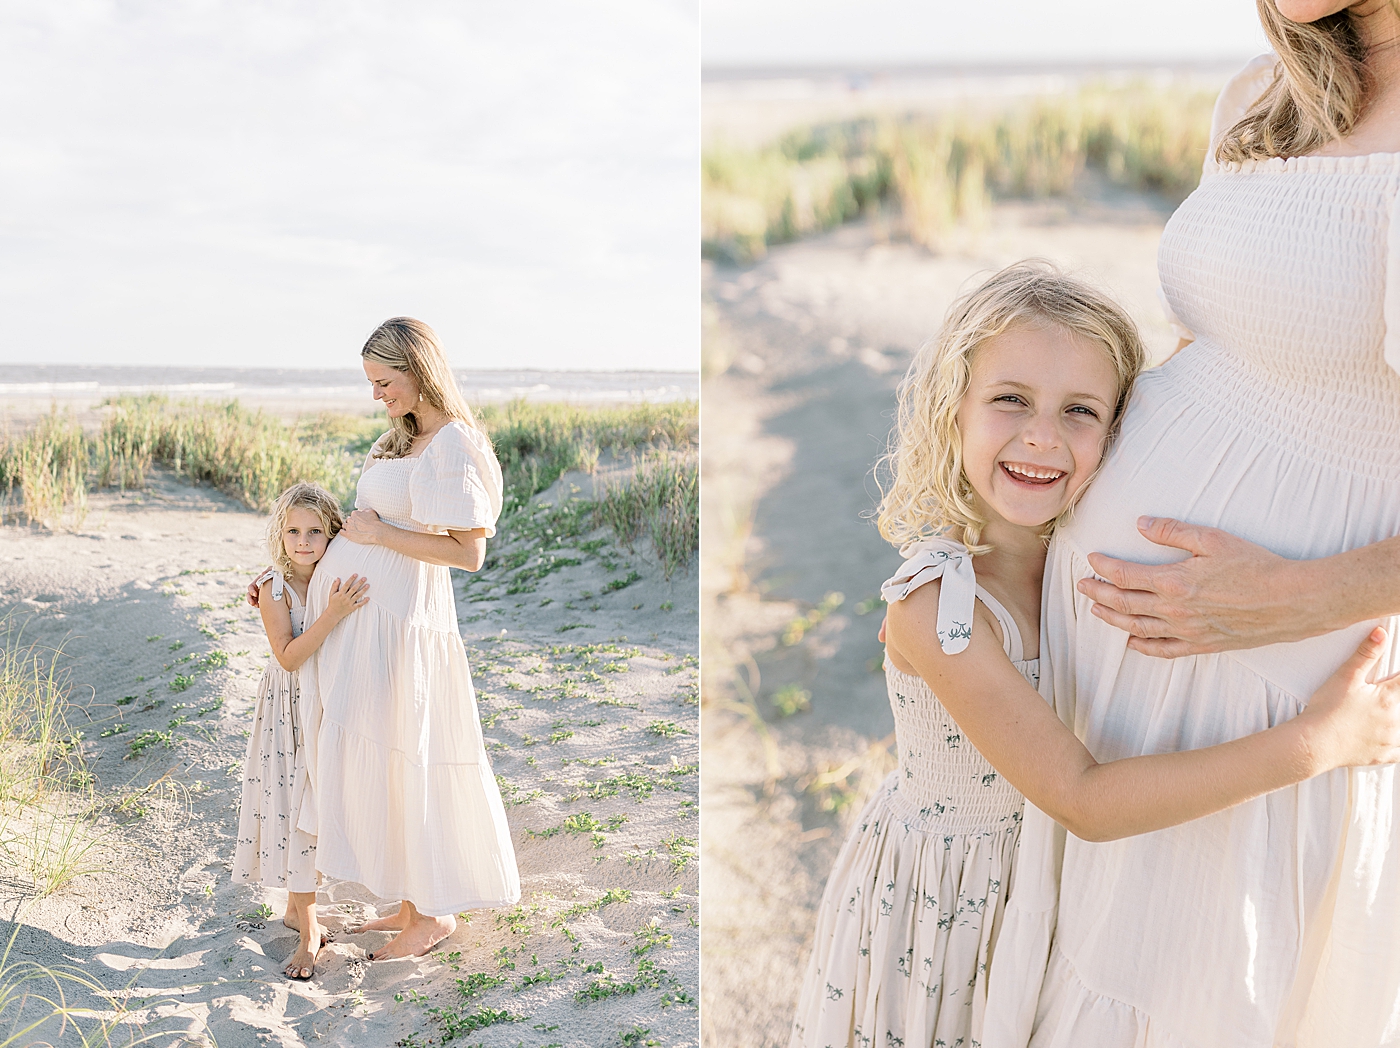 Little girl interacting with her mom at the beach during maternity session | Image by Caitlyn Motycka